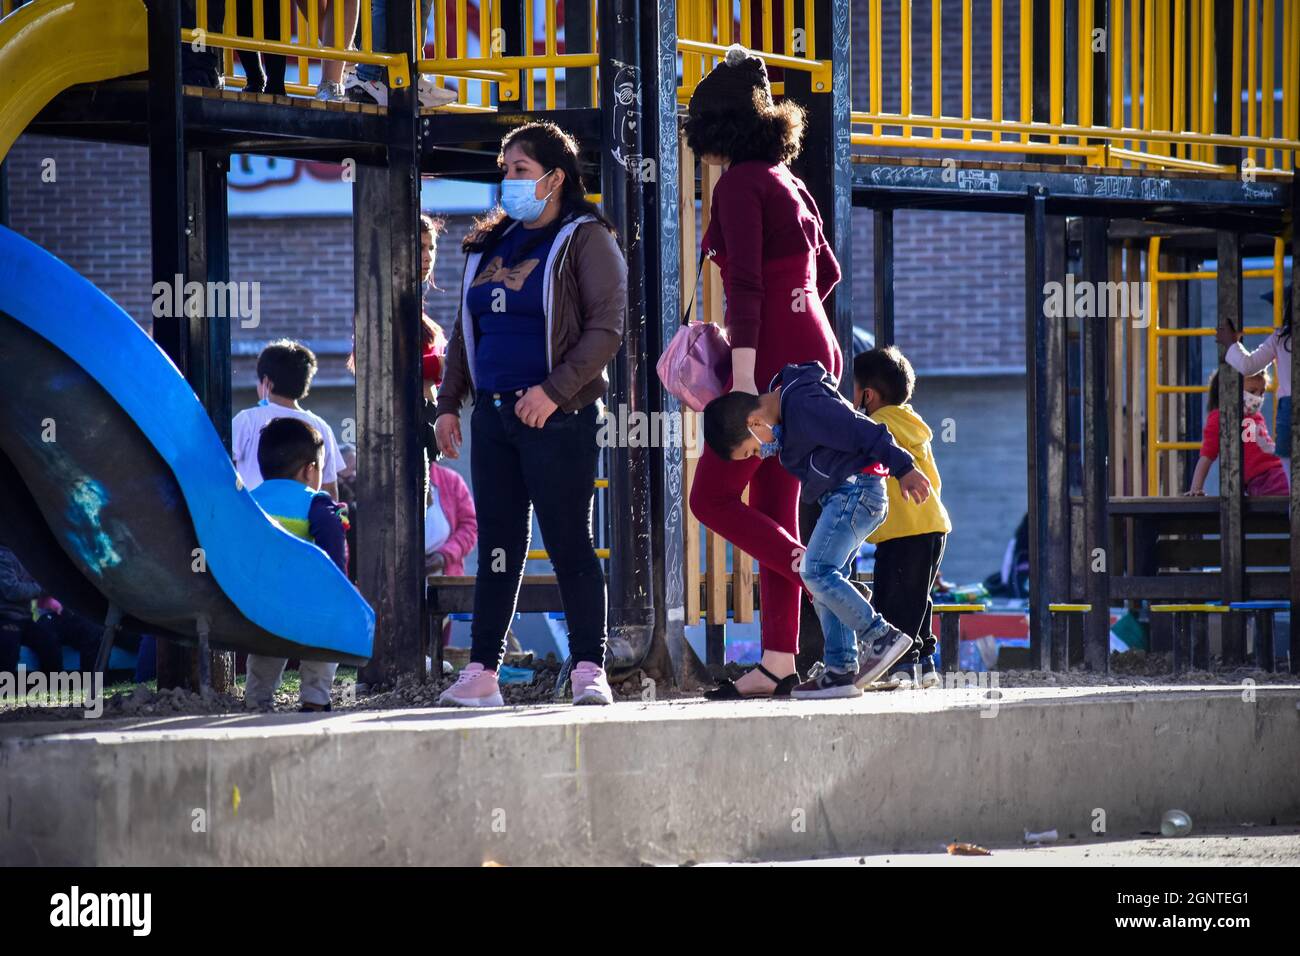 A mother visits a park with her children wearing protective face masks against the COVID-19 Pandemic in Cumbal - Nariño, Colombia on August 8, 2021. Stock Photo